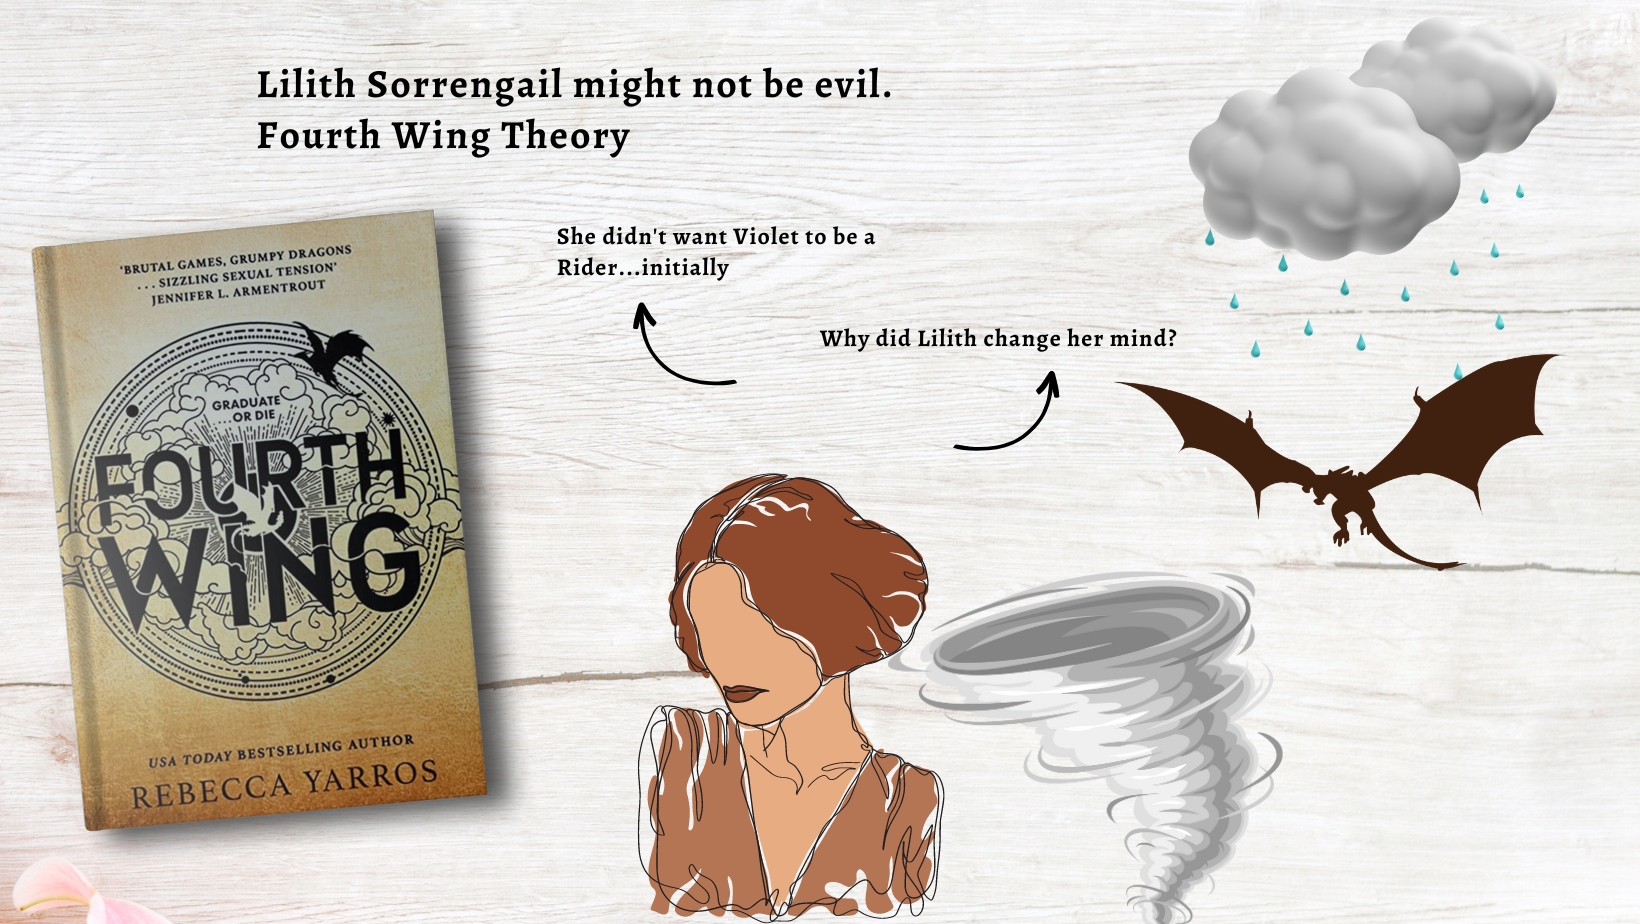 Fourth Wing Theory Lilith Sorrengail might not be evil